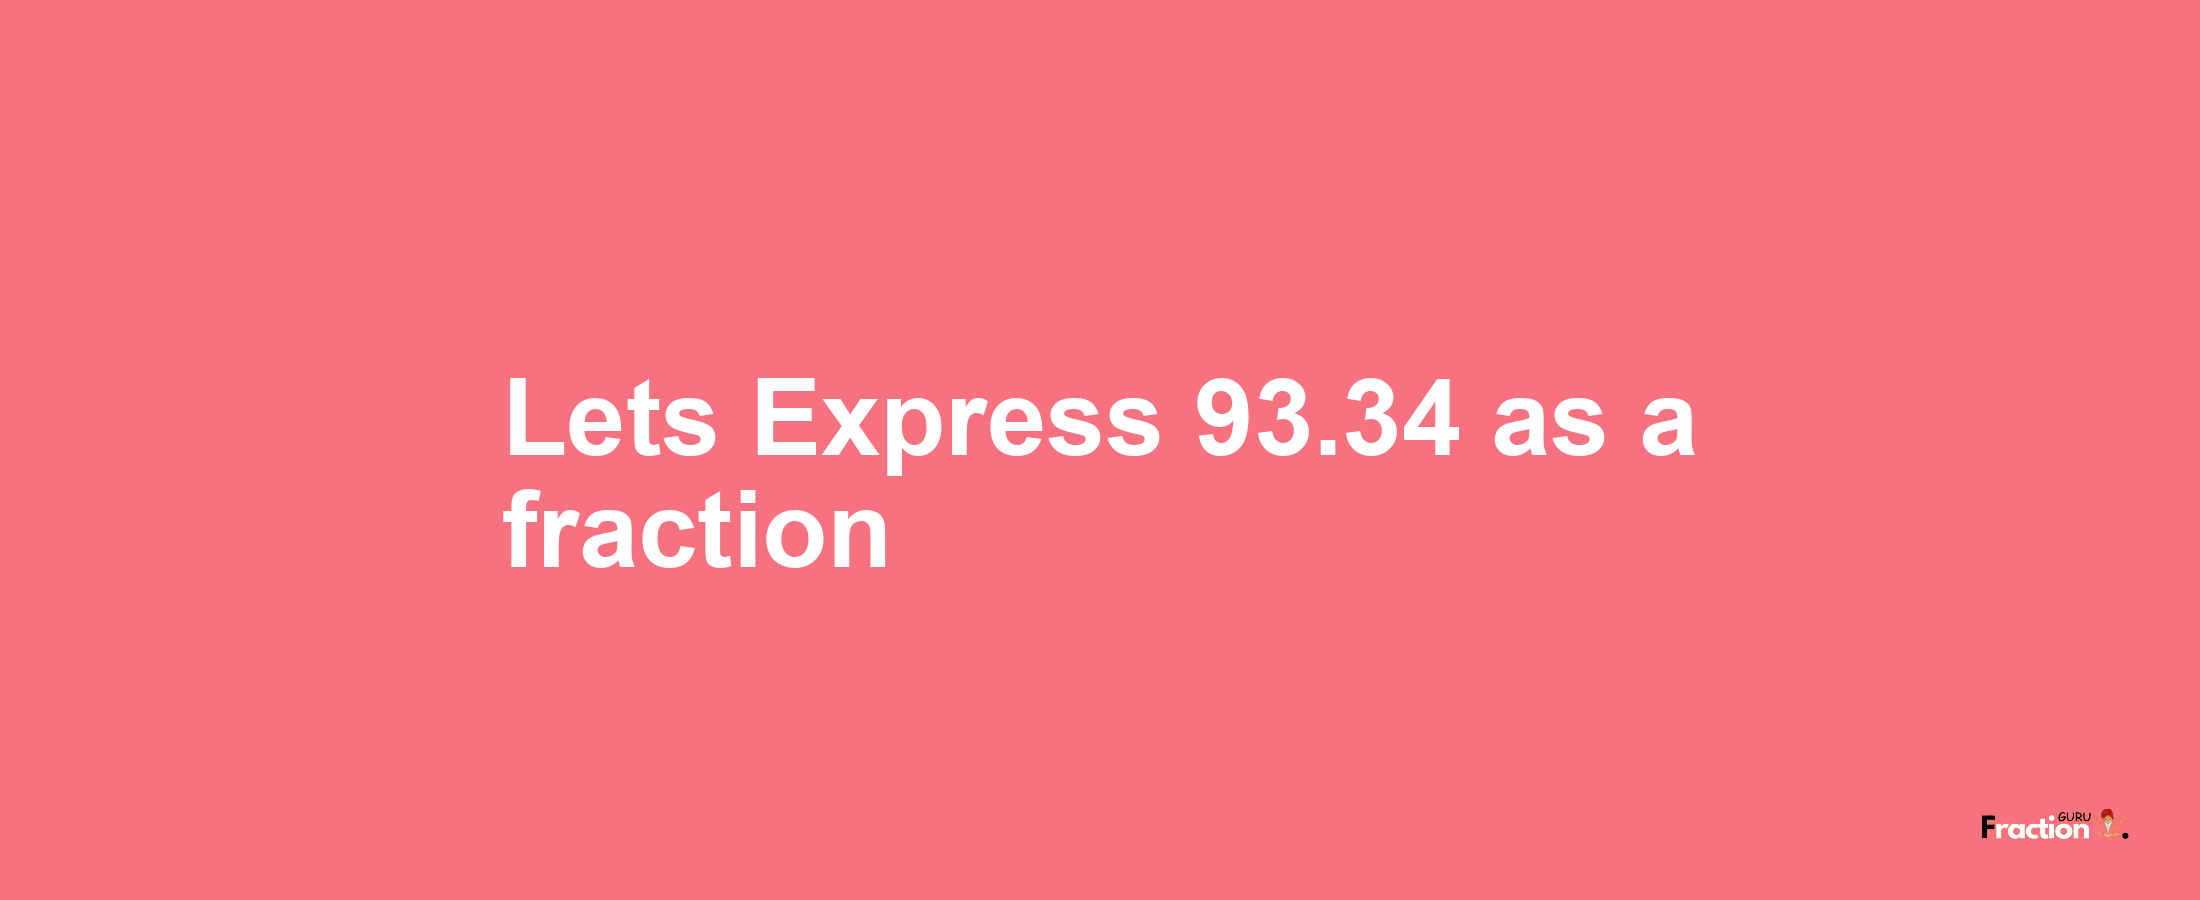 Lets Express 93.34 as afraction